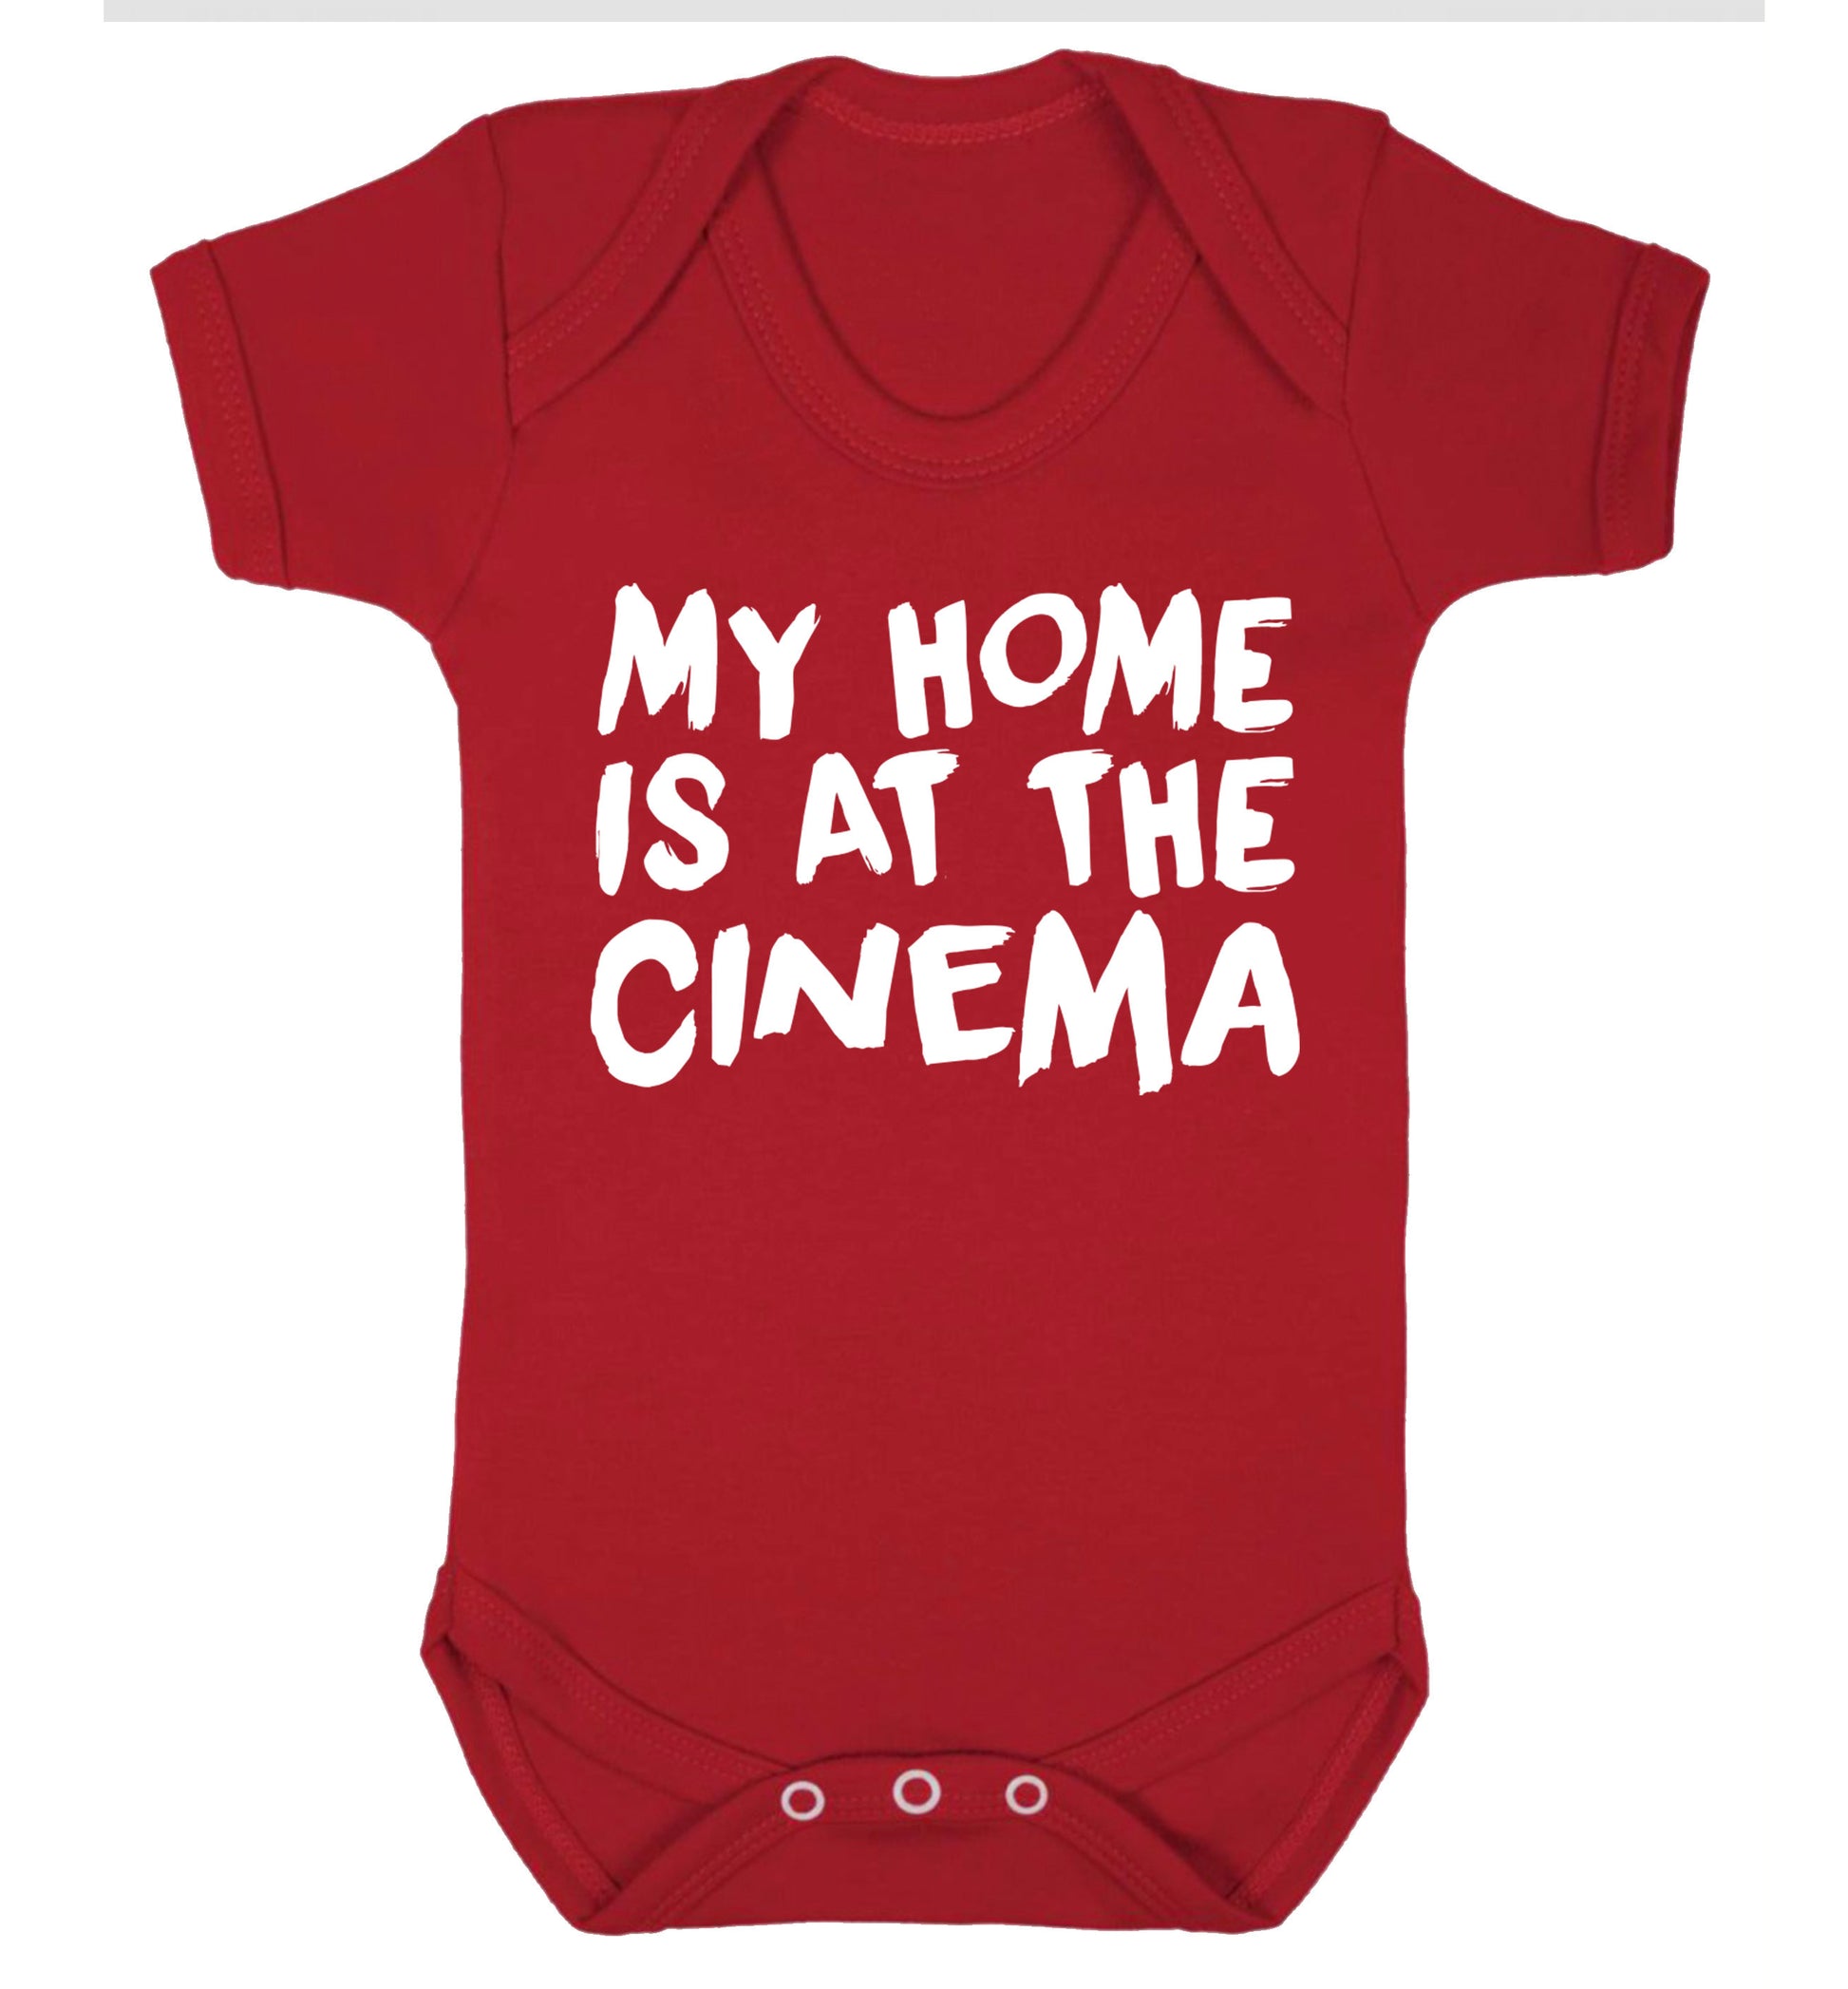 My home is at the cinema Baby Vest red 18-24 months